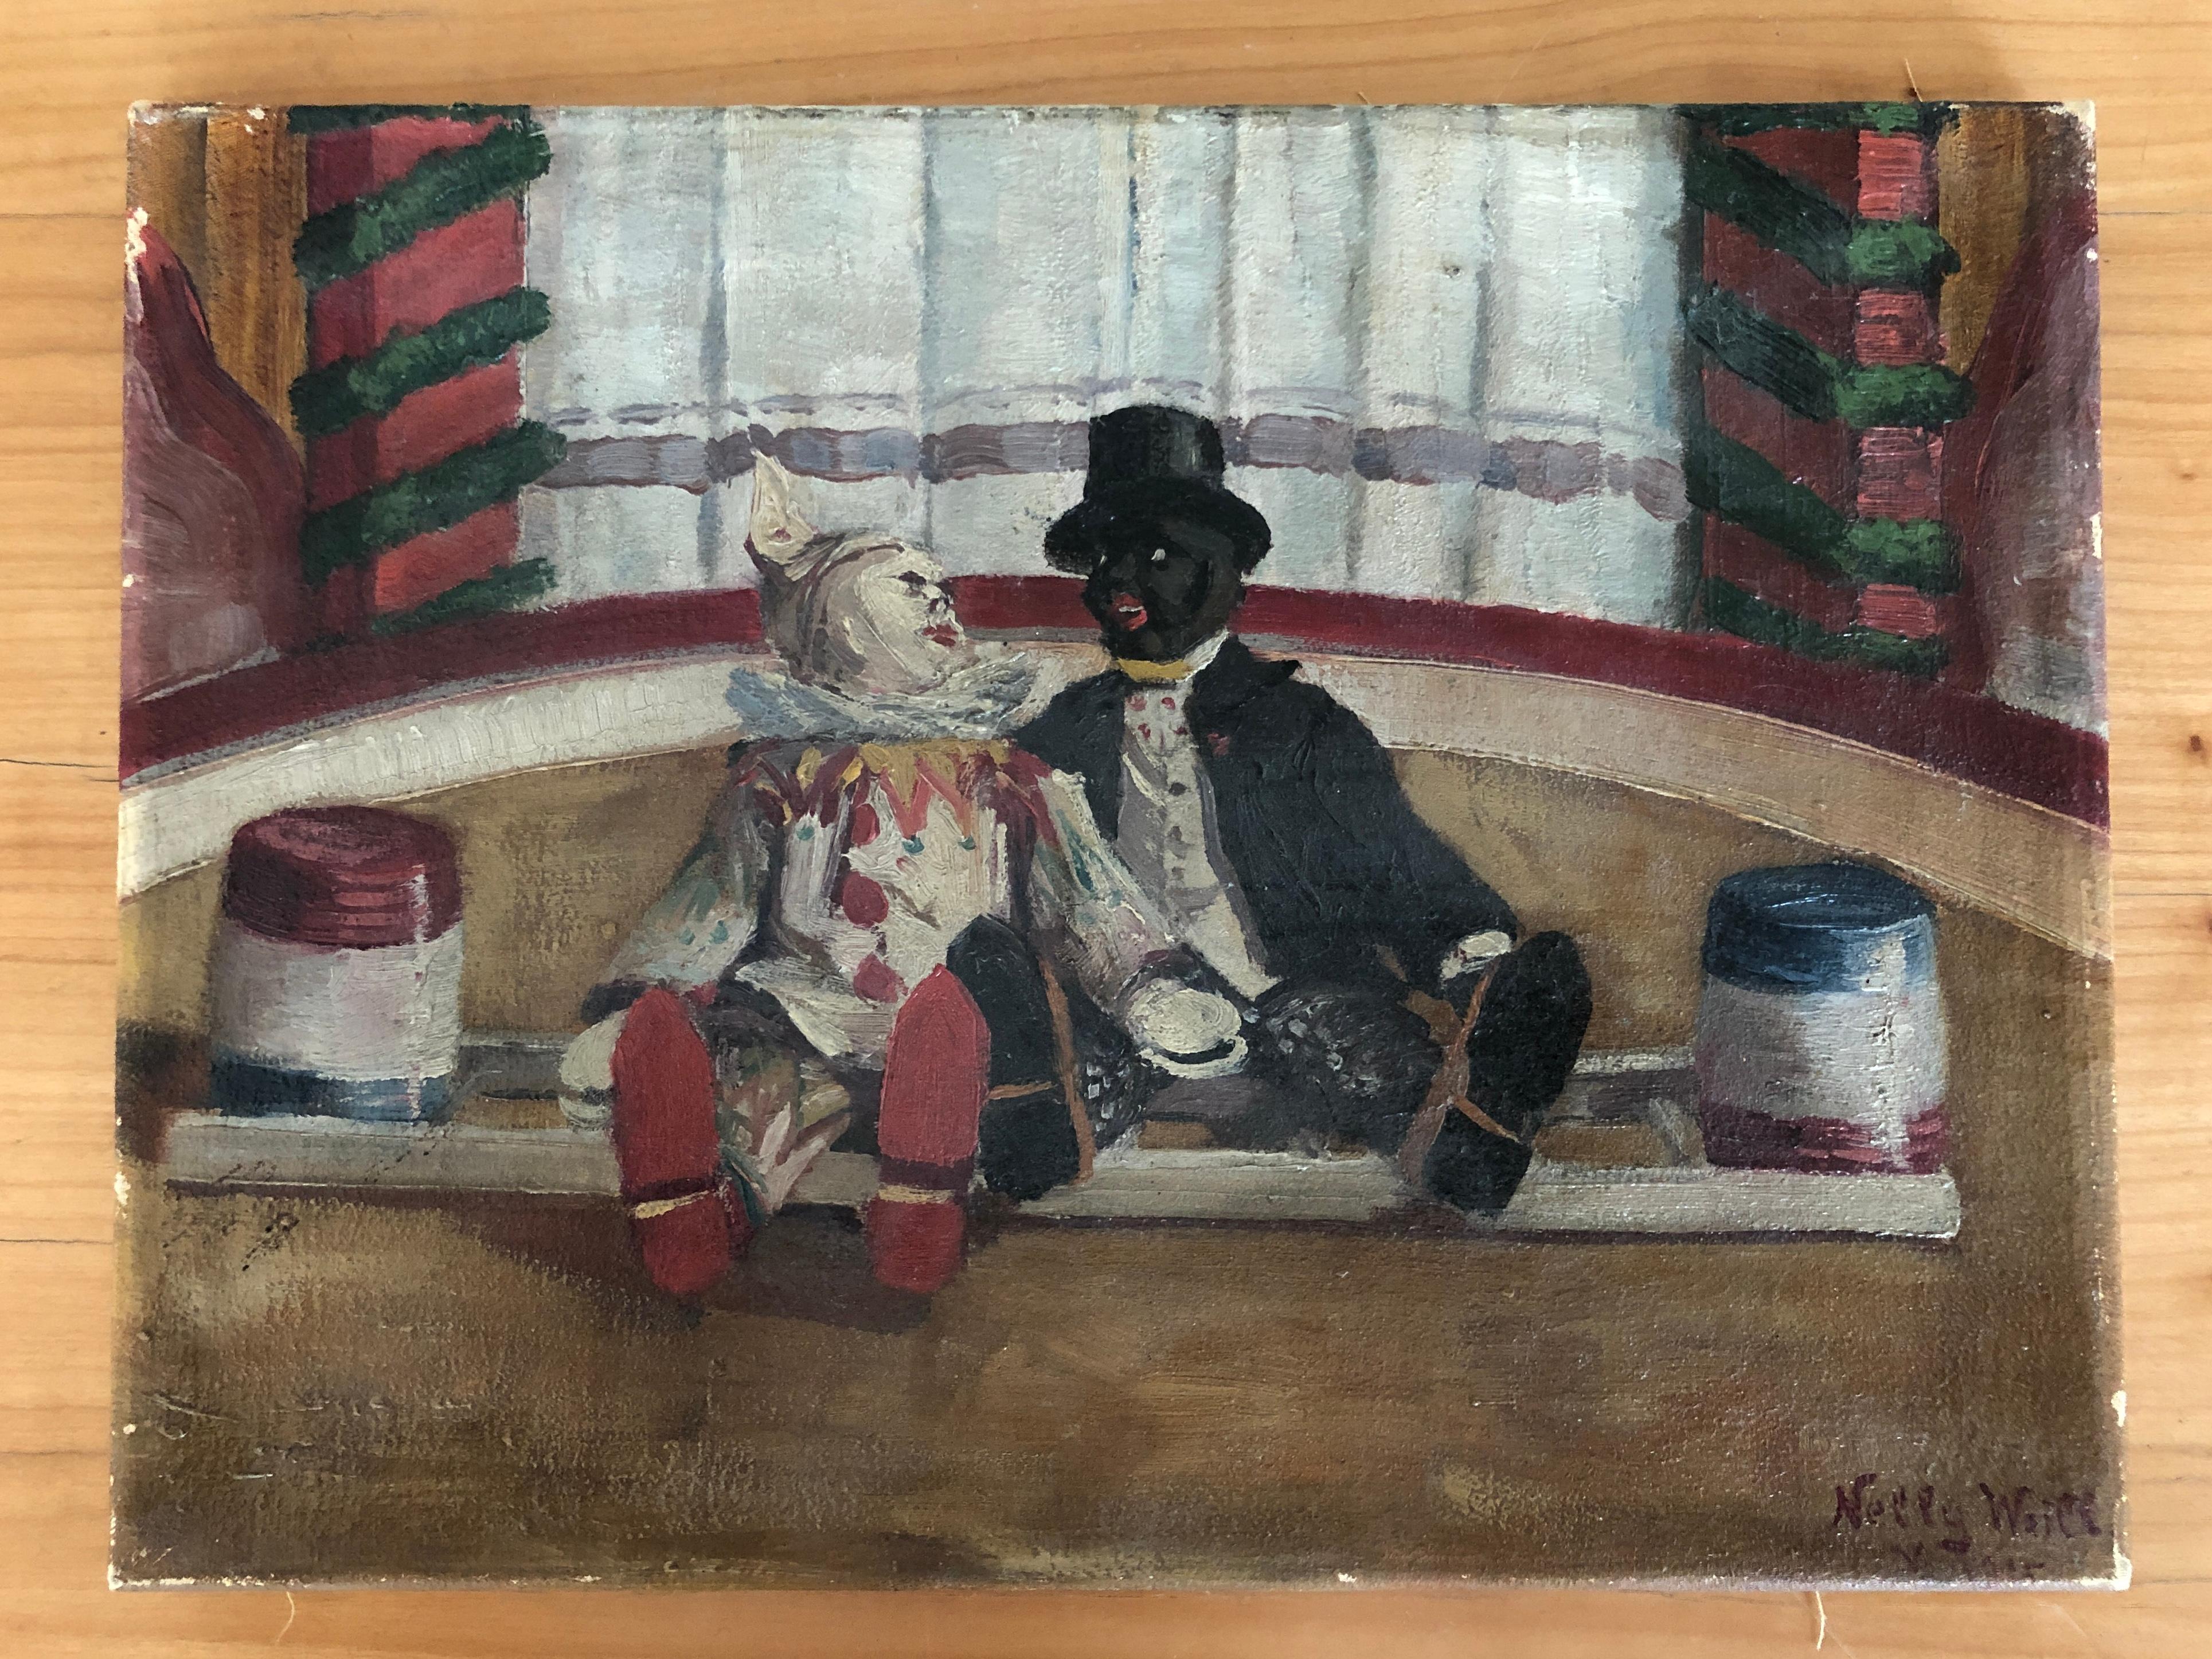 Two clowns sitting on the circus ring - Painting by Nelly Weill